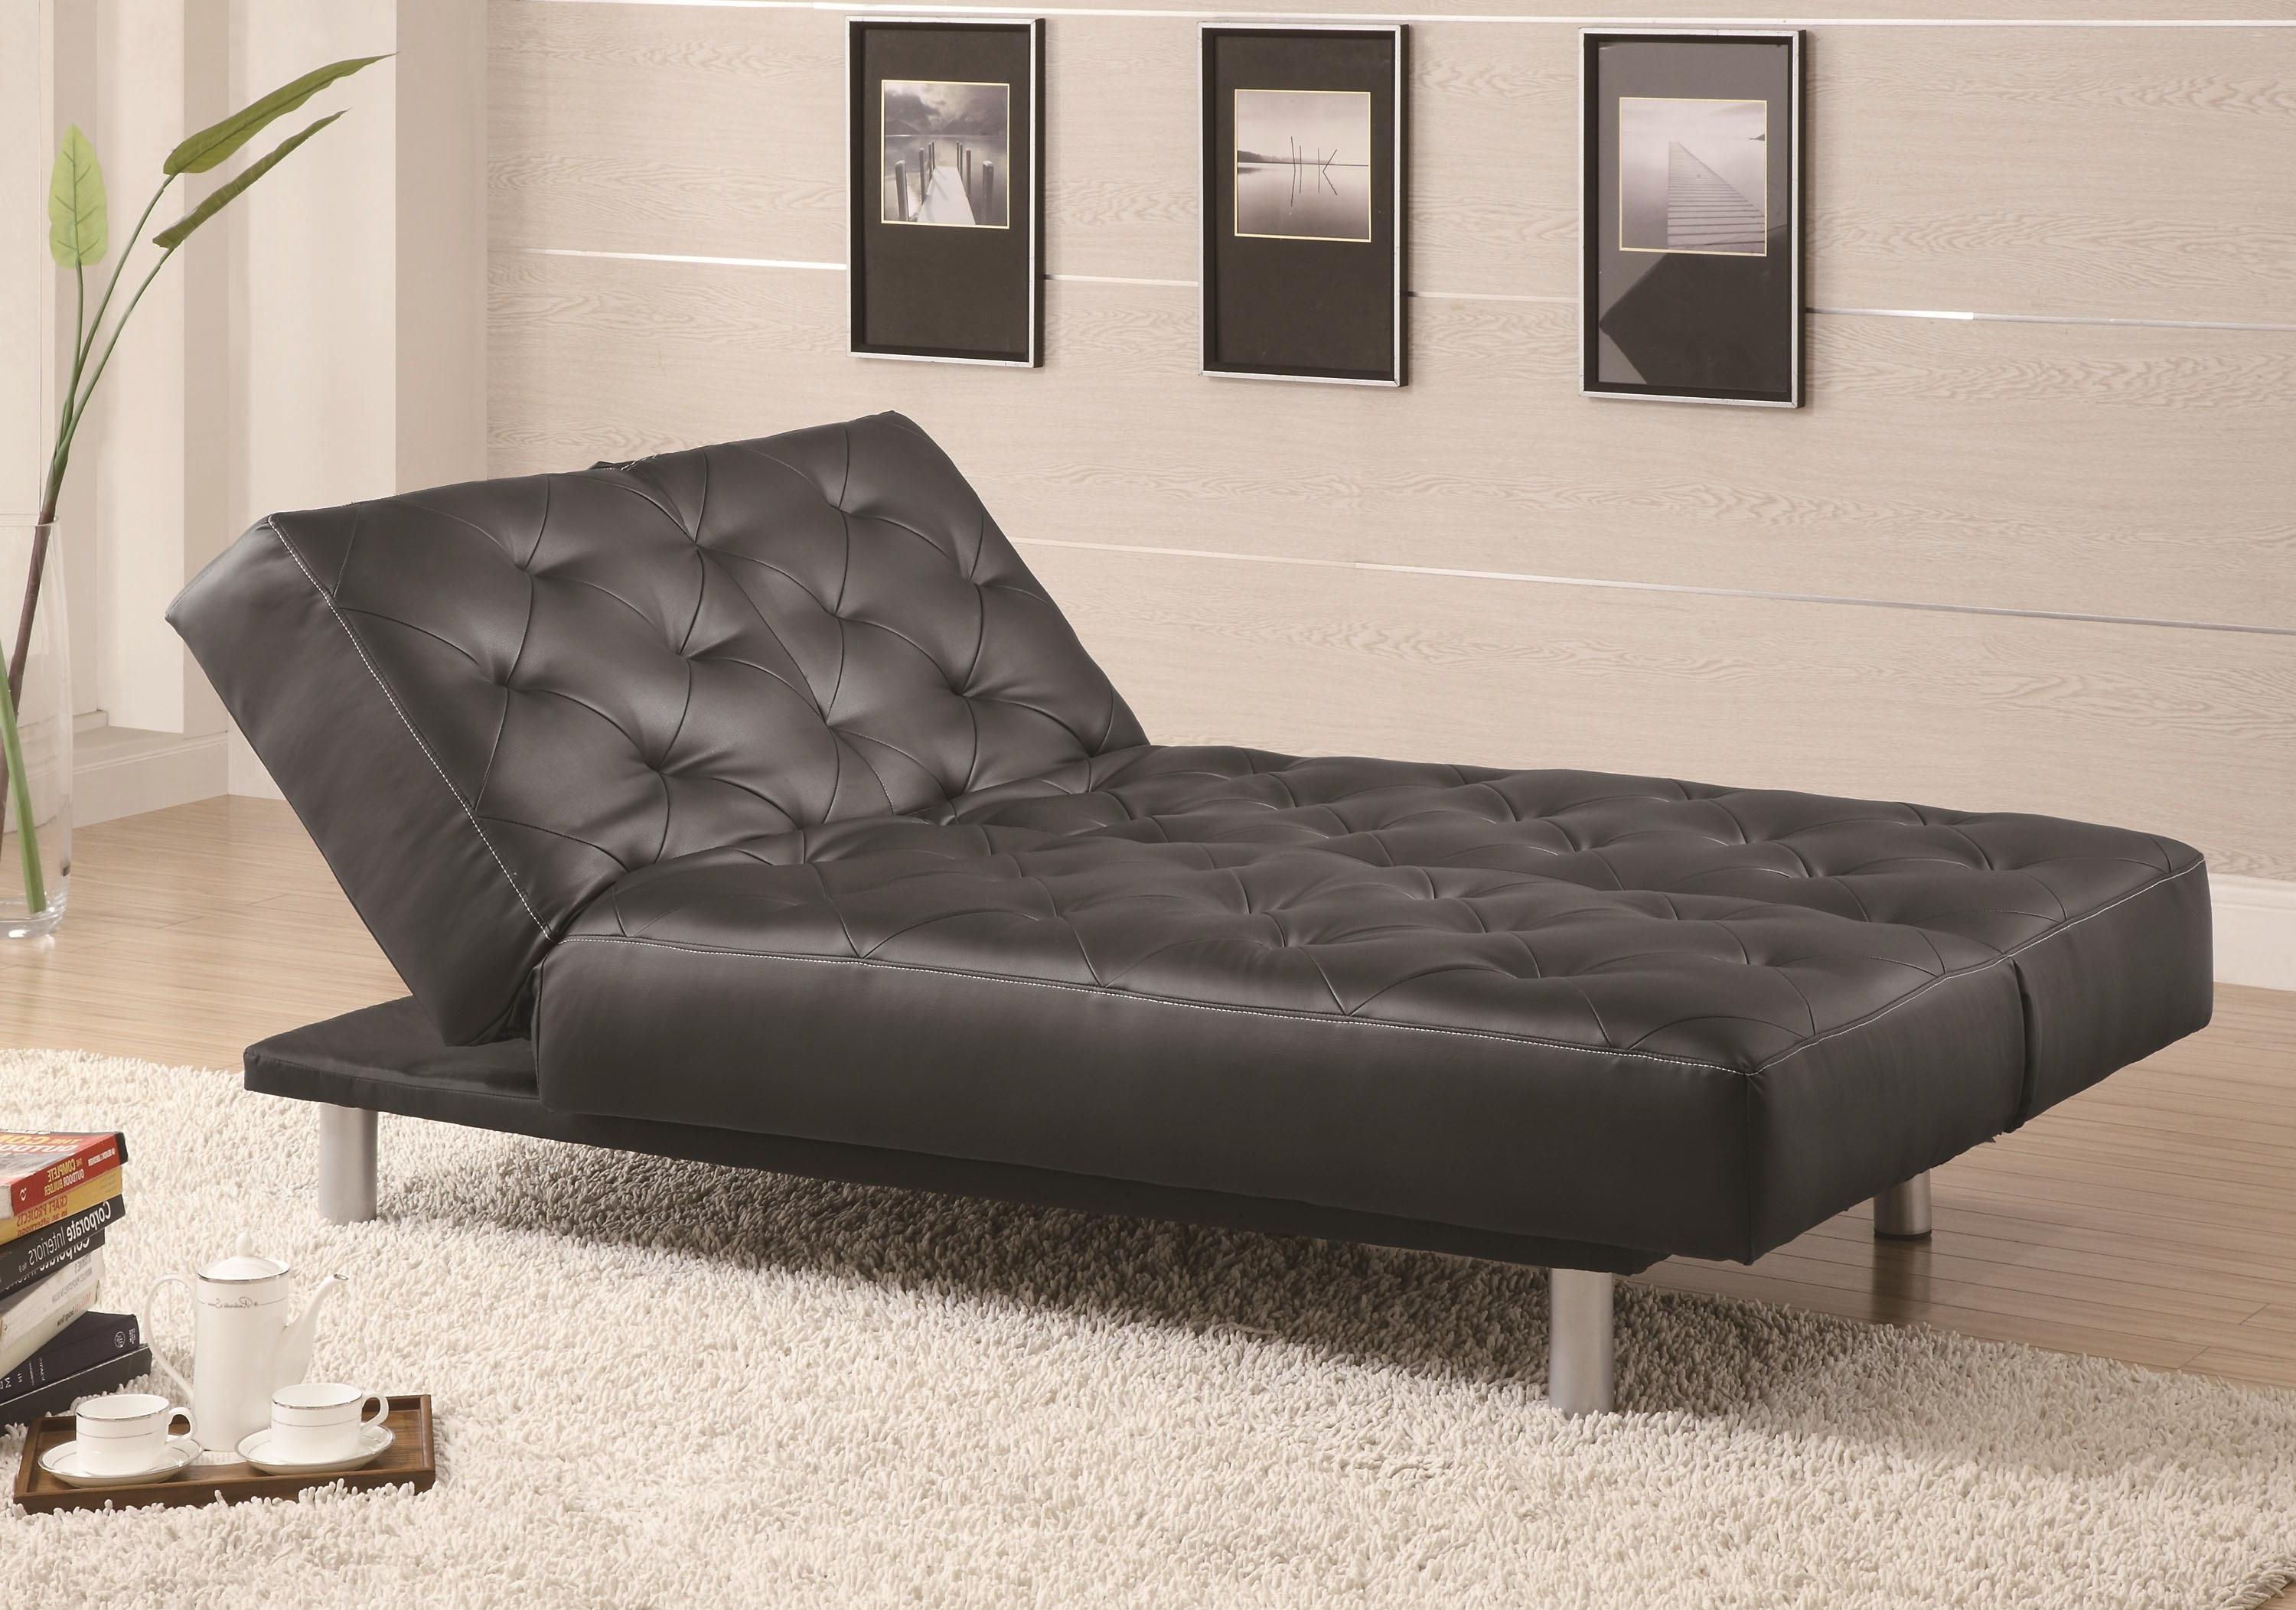 Oversized Black Leather Tufted Chaise Lounge With Chrome Legs Inside Well Known Black Leather Chaises (View 13 of 15)